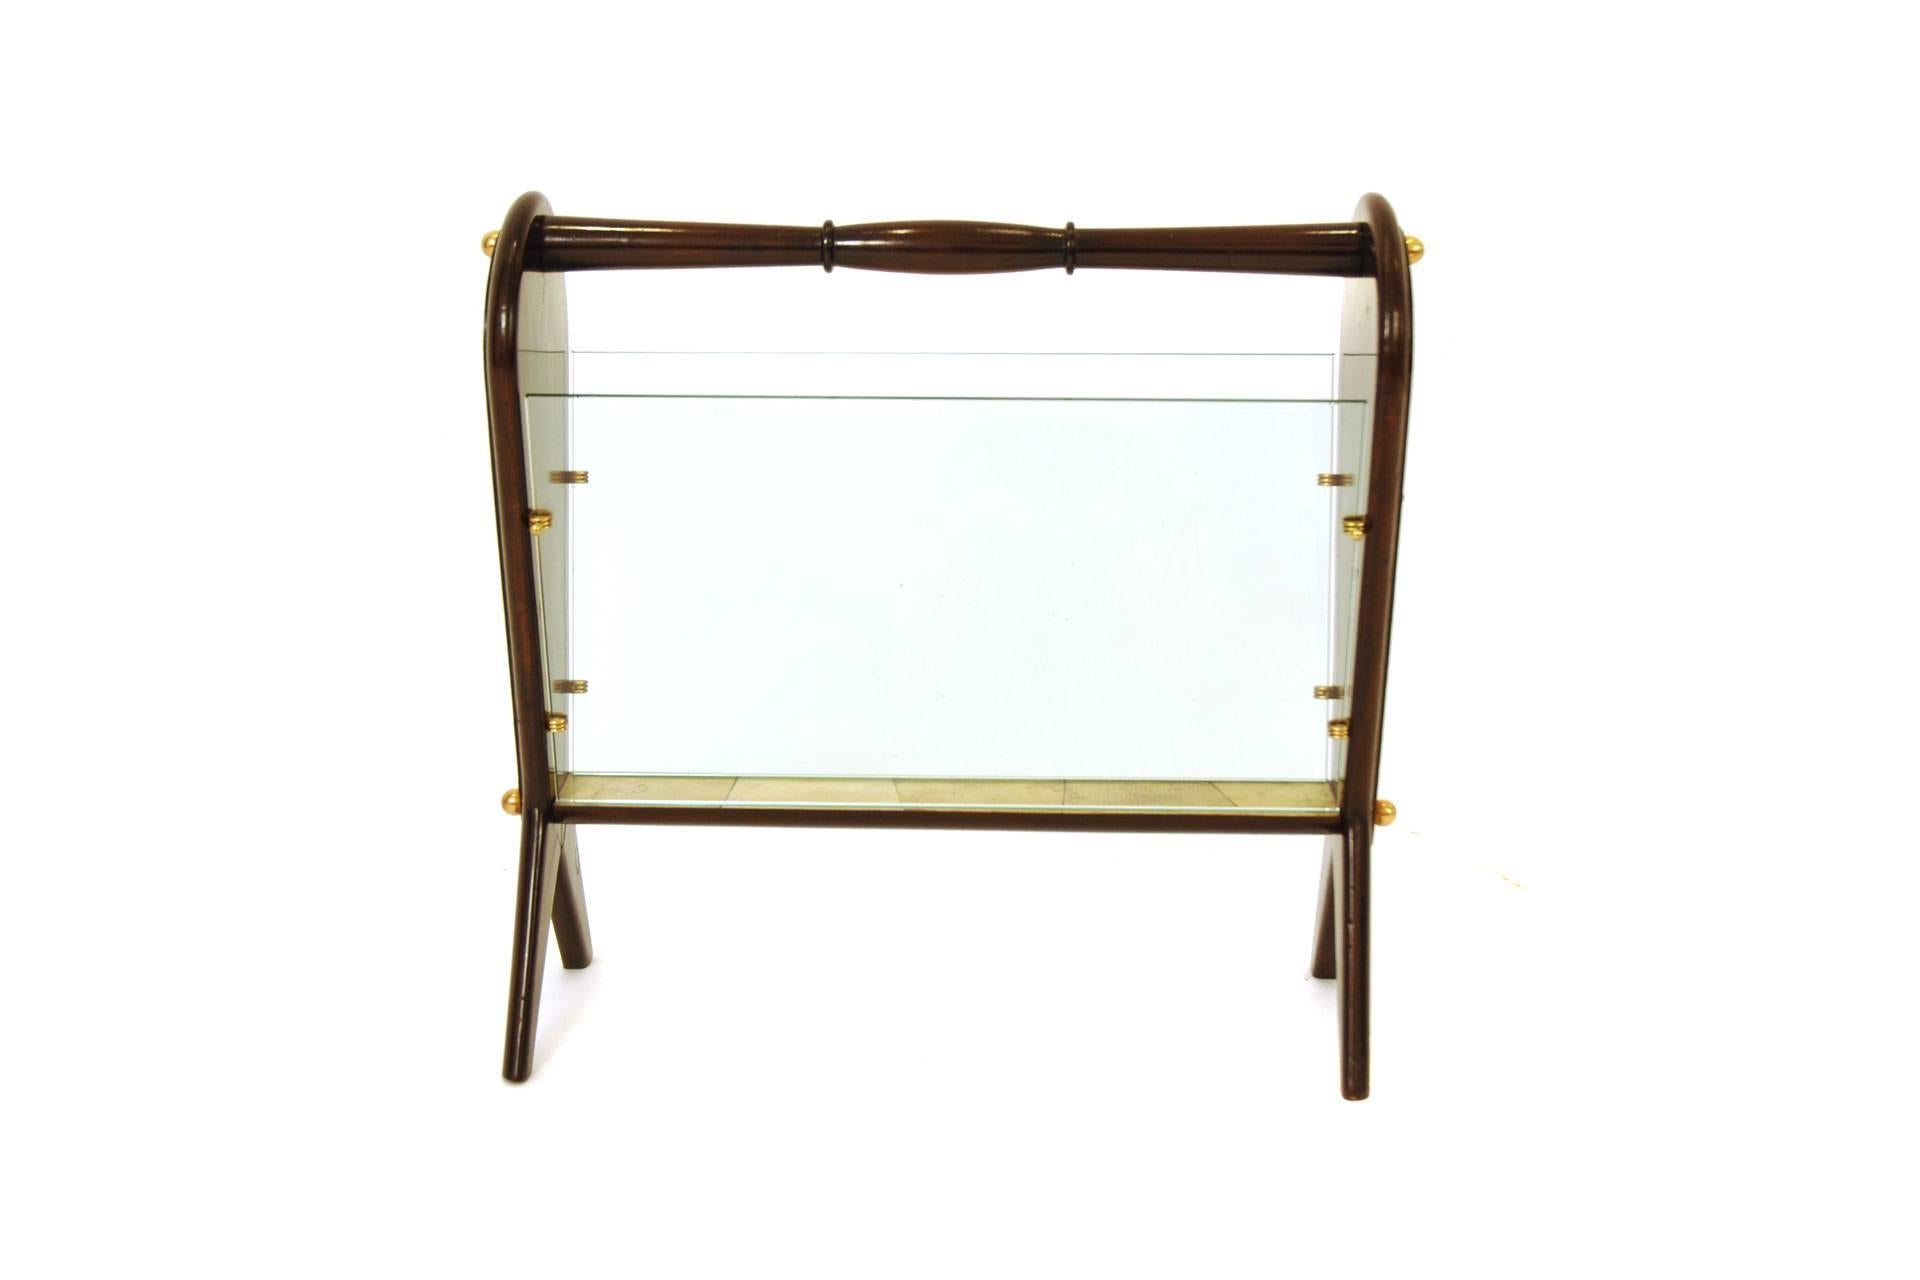 This piece was made in Italy between 1940 and 1950. The frame is made of walnut. The sides and the bottom is covered with goatskin and the walls are made of glass. The construction is fixed with brass screws.